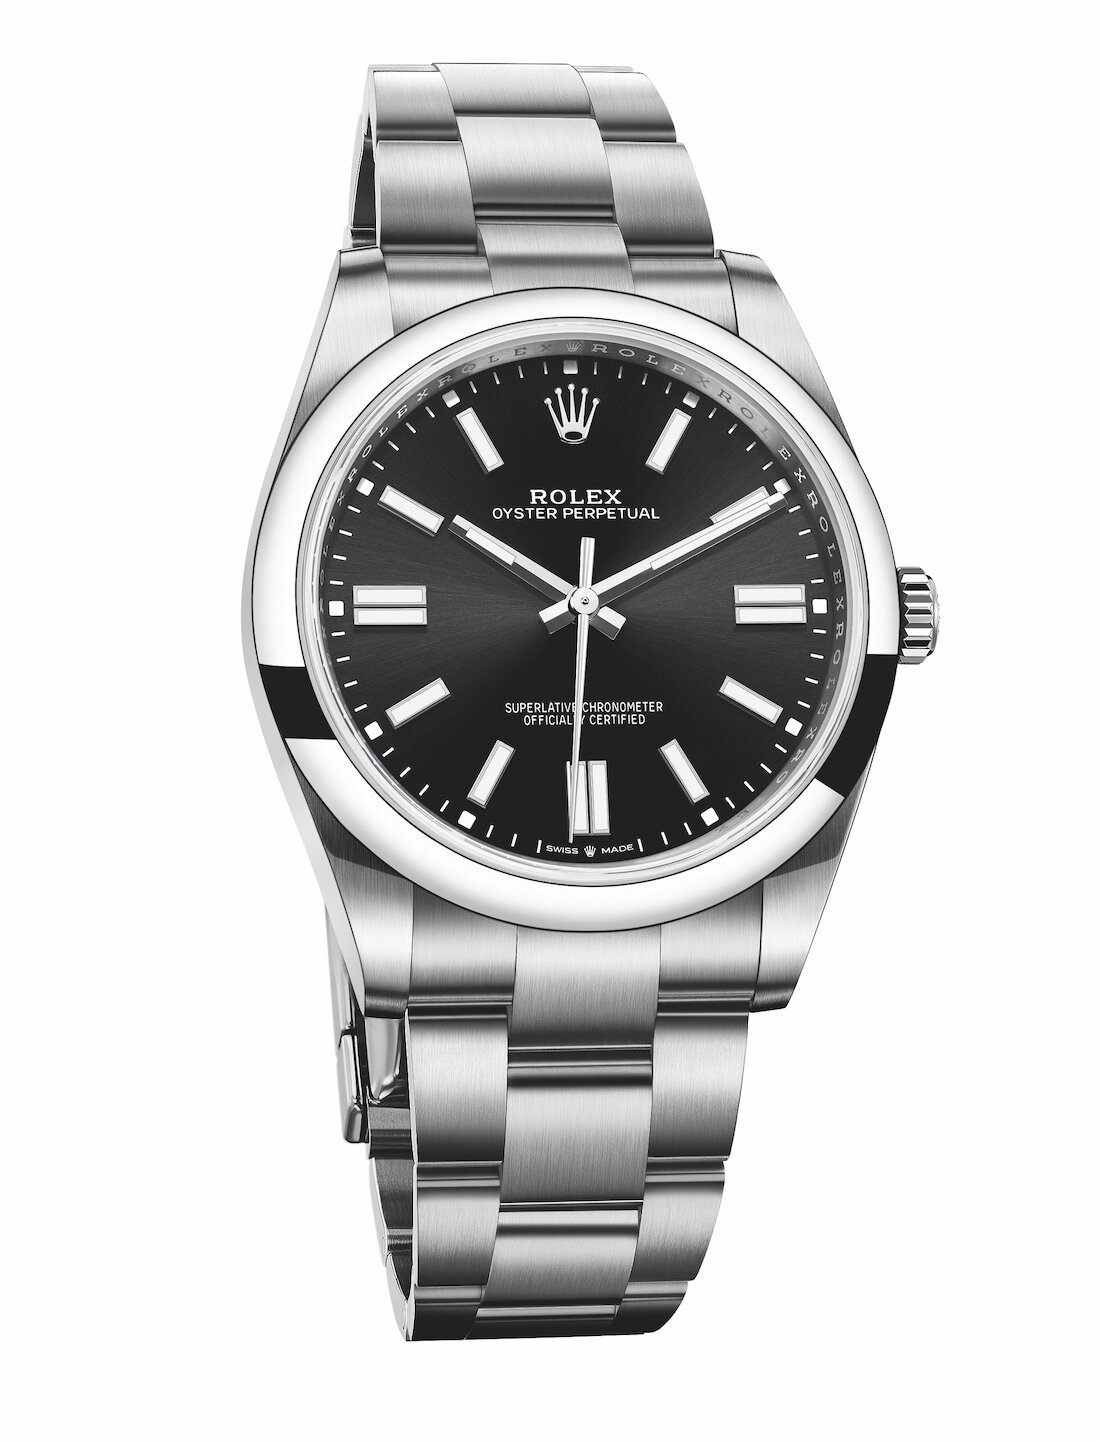 41mm oyster perpetual